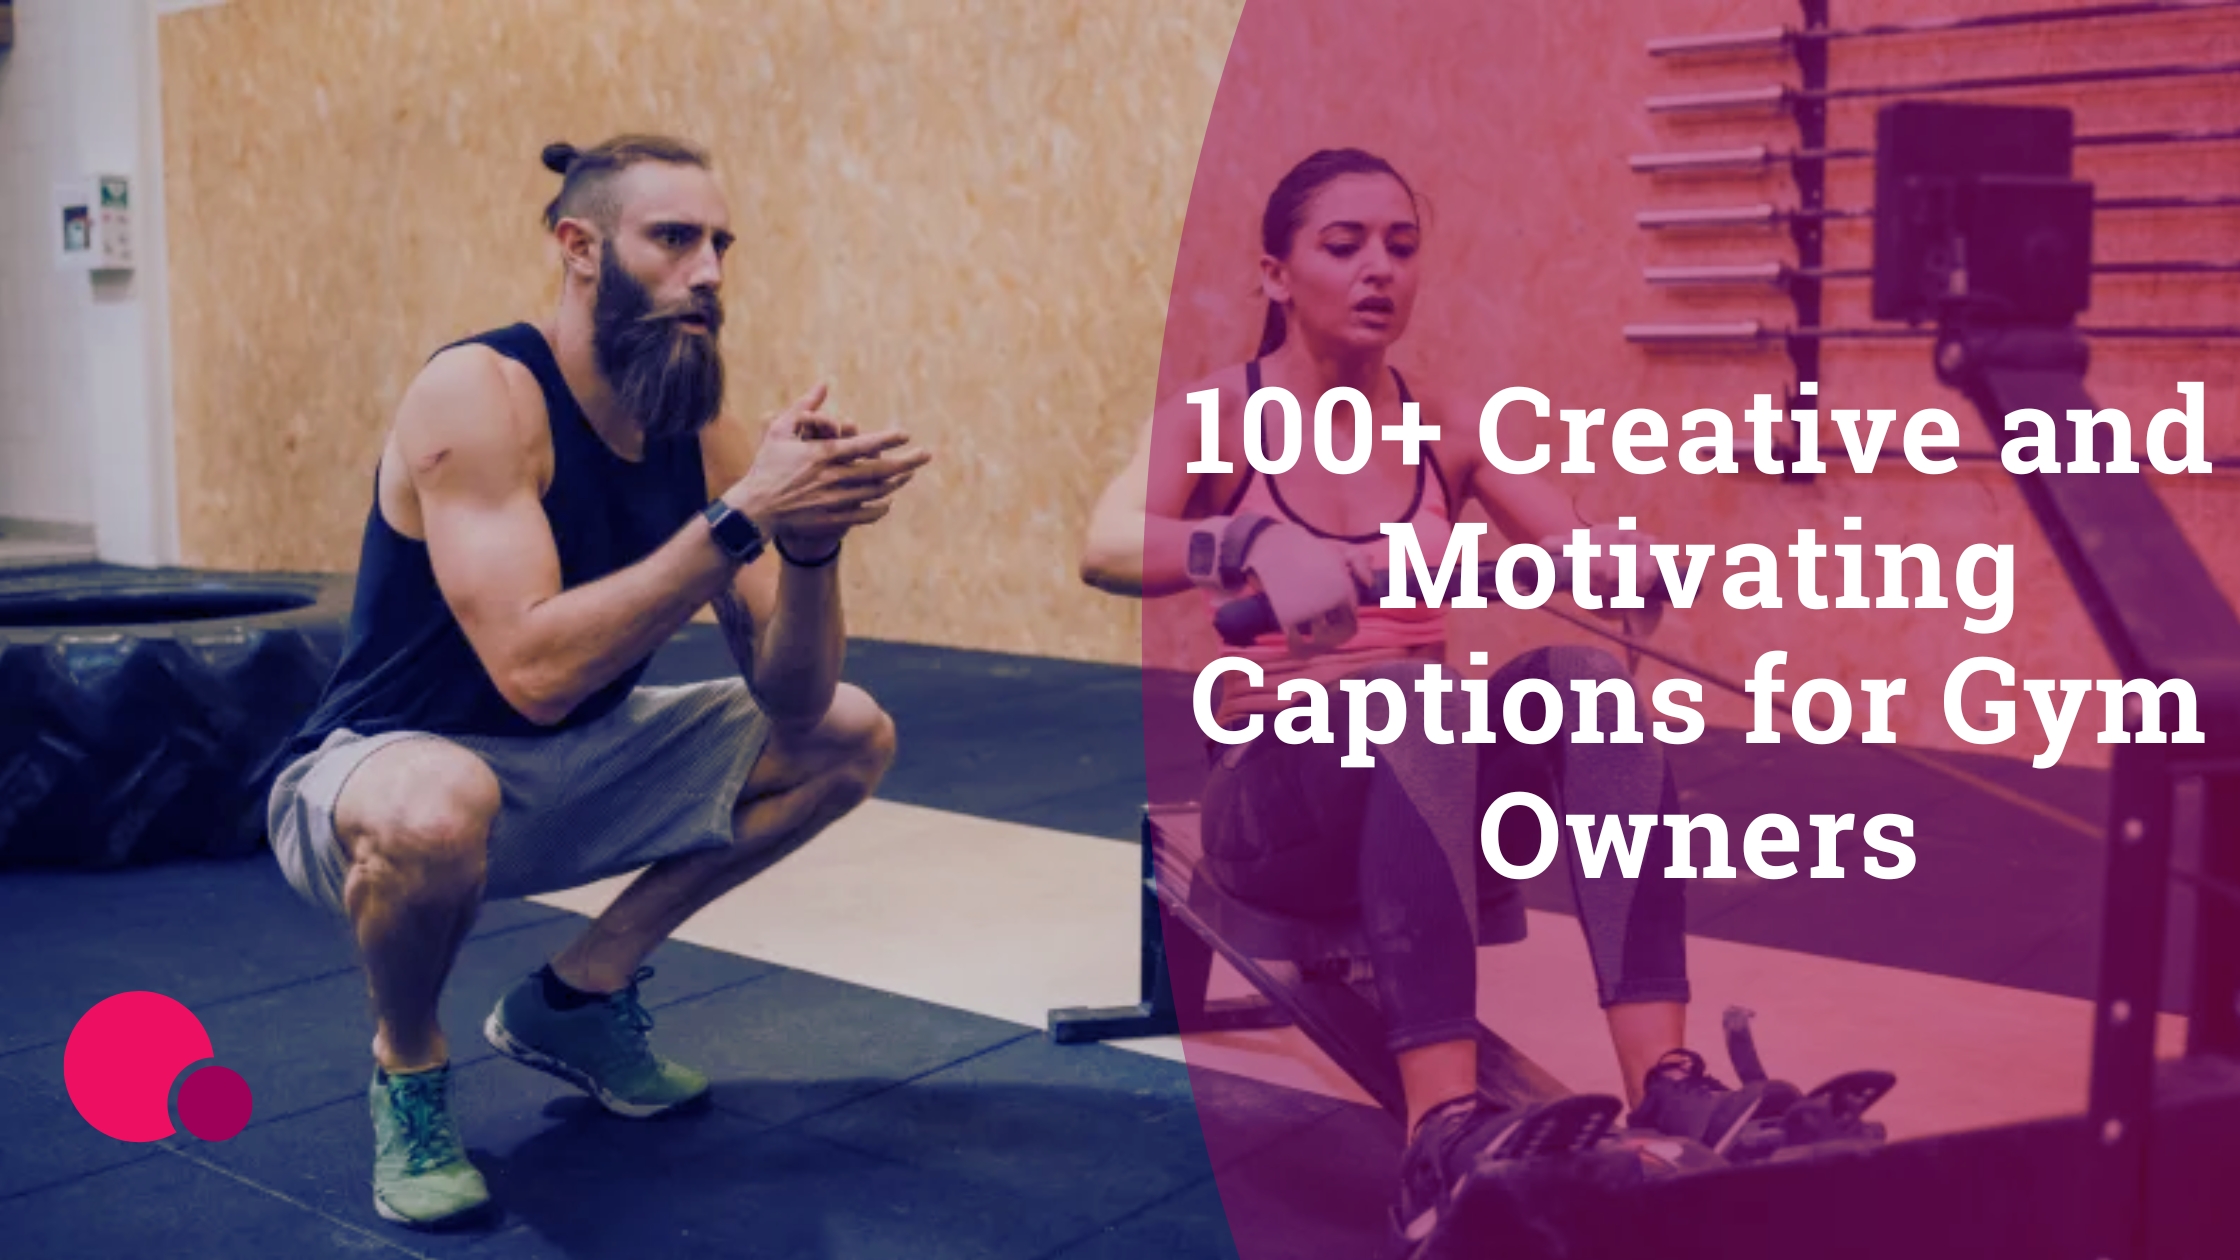 Over 100 Motivational Fitness Quotes With Images